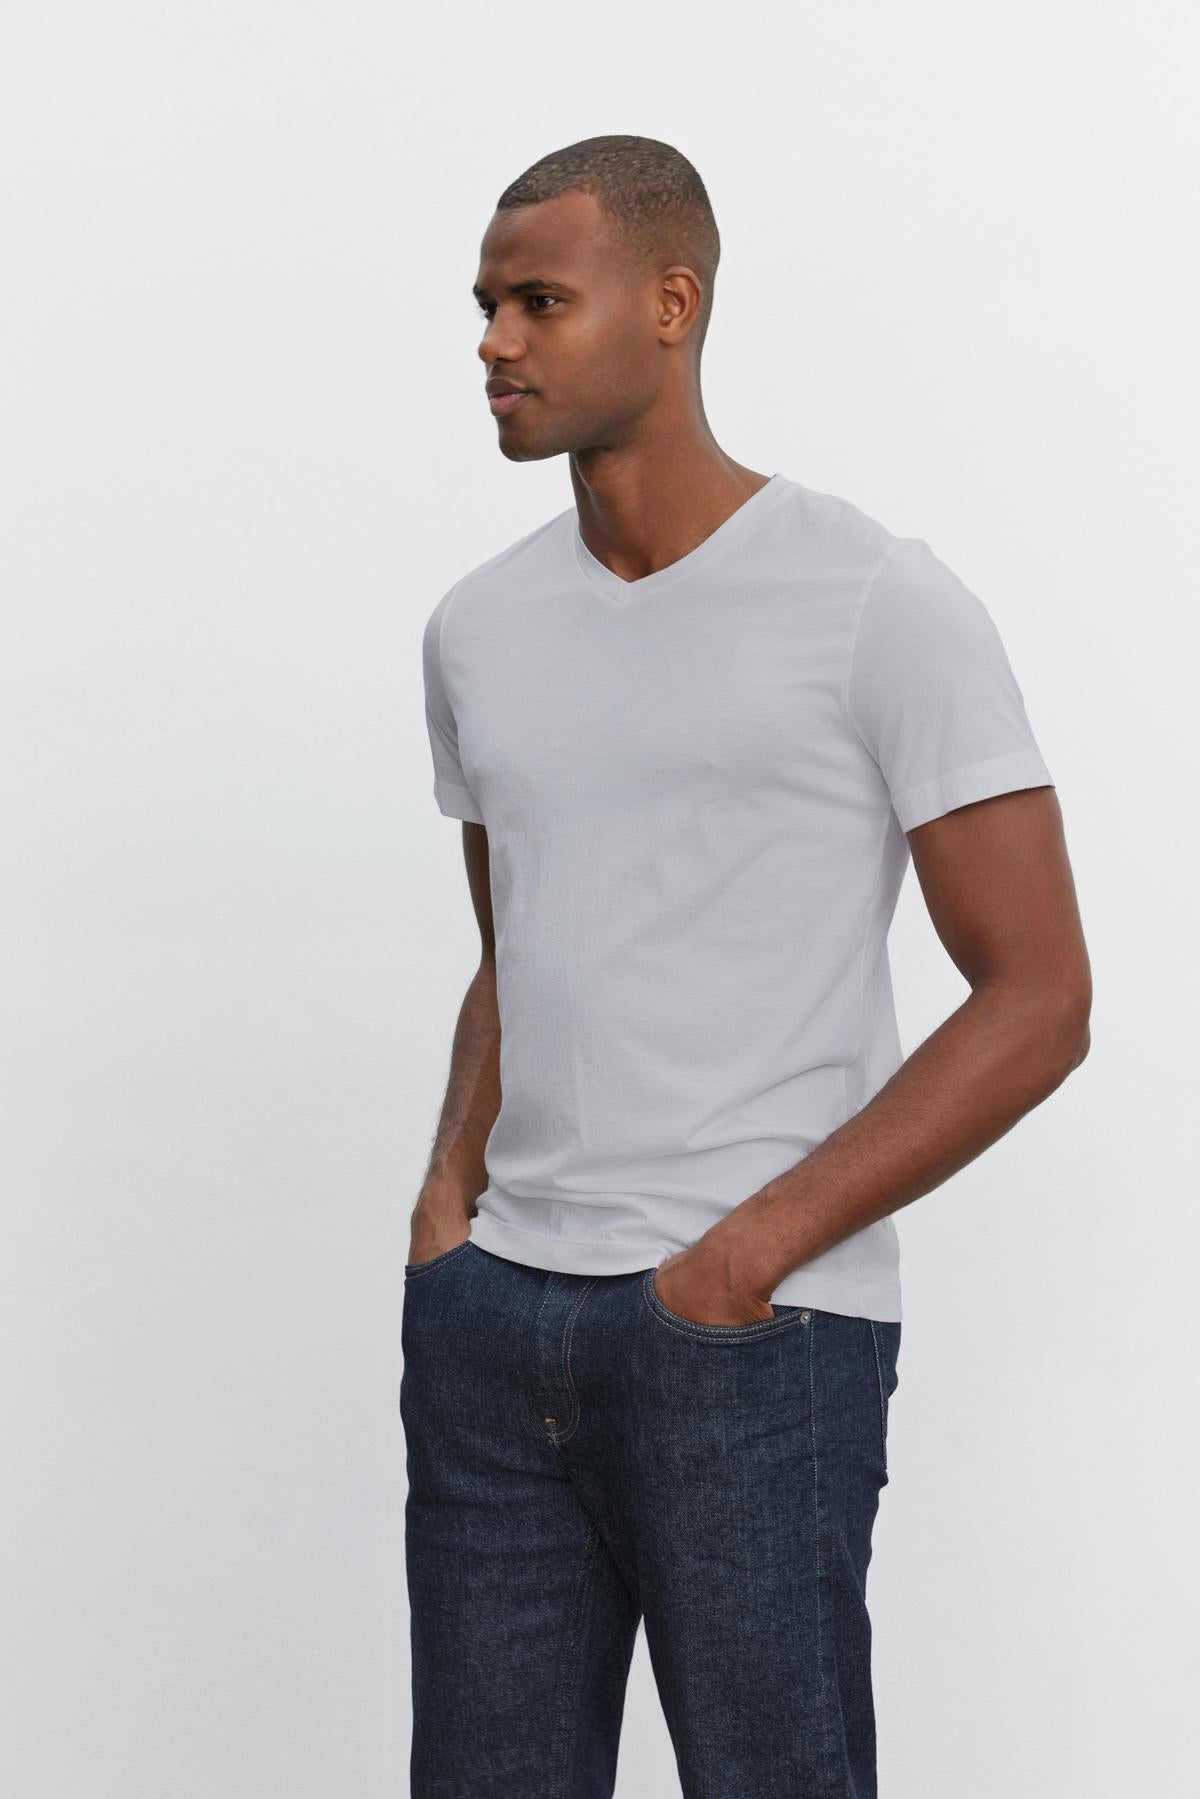   A man with short hair wears a plain light gray SAMSEN TEE made from whisper cotton knit by Velvet by Graham & Spencer and dark blue jeans. He stands and looks to the right with his hands in his pockets, against a plain white background. 